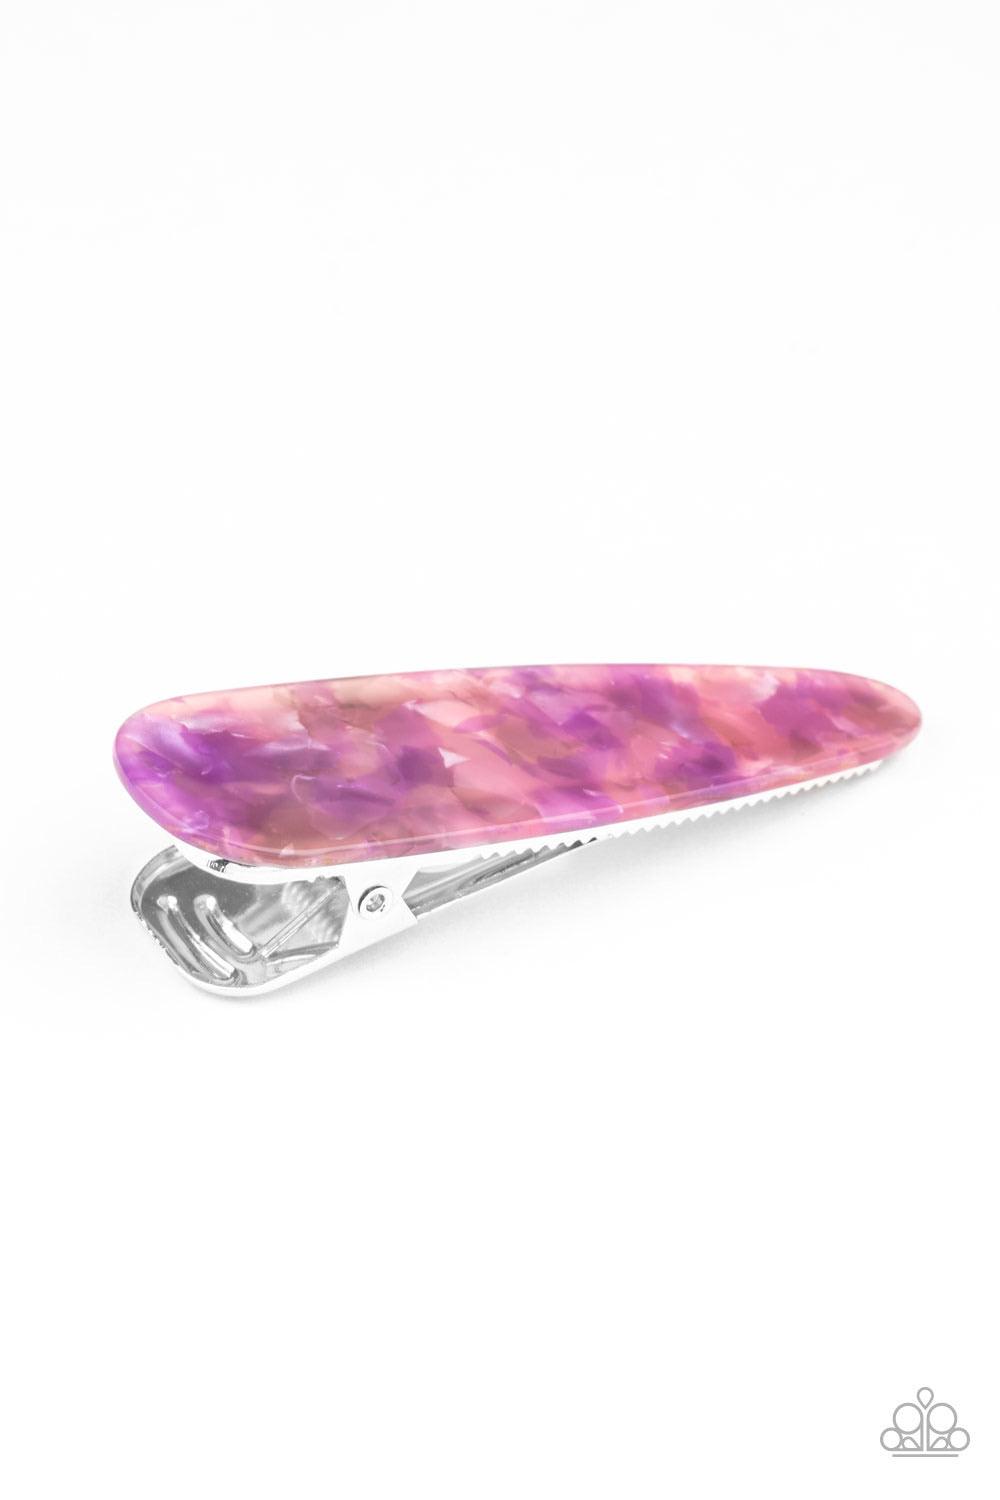 Paparazzi Accessories HAIR I Am - Purple Speckled in iridescent accents, a thick acrylic frame clips back the hair for a colorfully retro look. Features a standard hair clip on the back. Color may vary. Sold as one individual hair clip. Hair Accessories